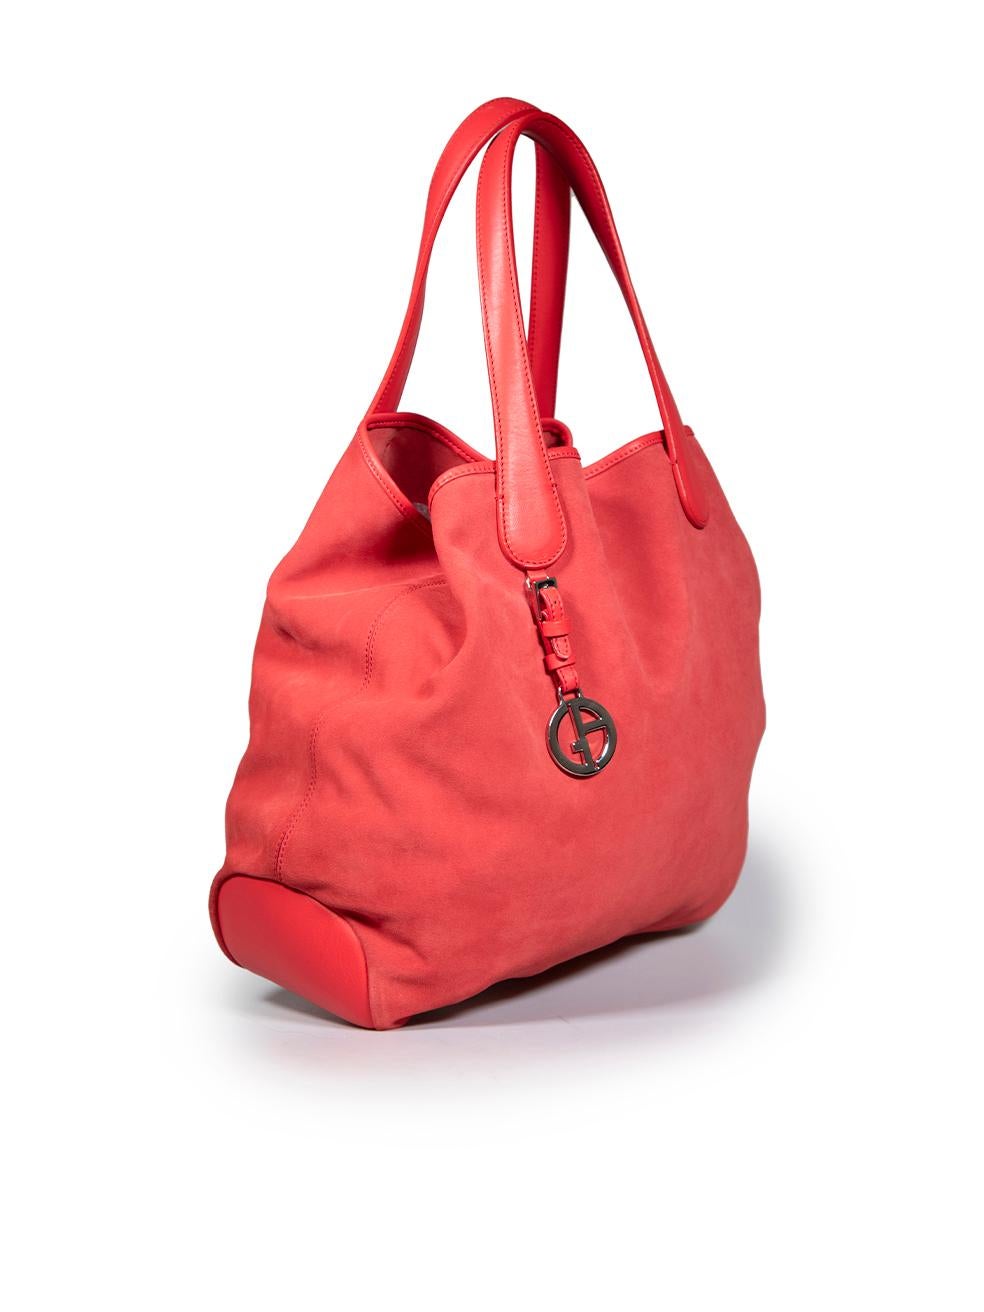 CONDITION is Very good. Minimal wear to bag is evident. There is some scratches, abrasions and creasing to the suede, and light indentations to the base of the bag on this used Giorgio Armani designer resale item.
 
 
 
 Details
 
 
 Red
 
 Suede
 
